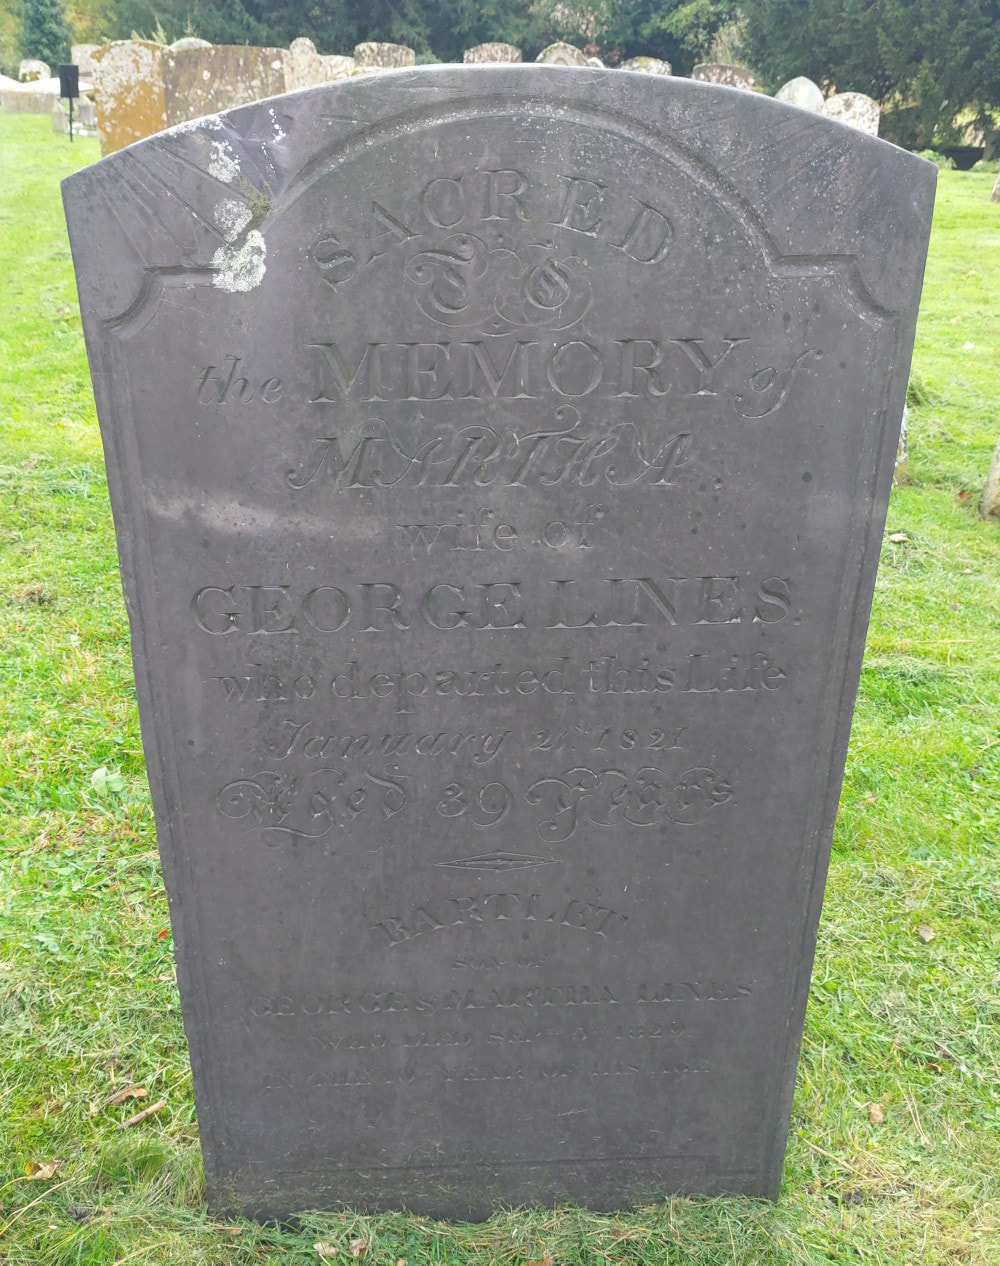 Gravestone St Andrews Churchyard Great Linford Martha and Bartlet Lines